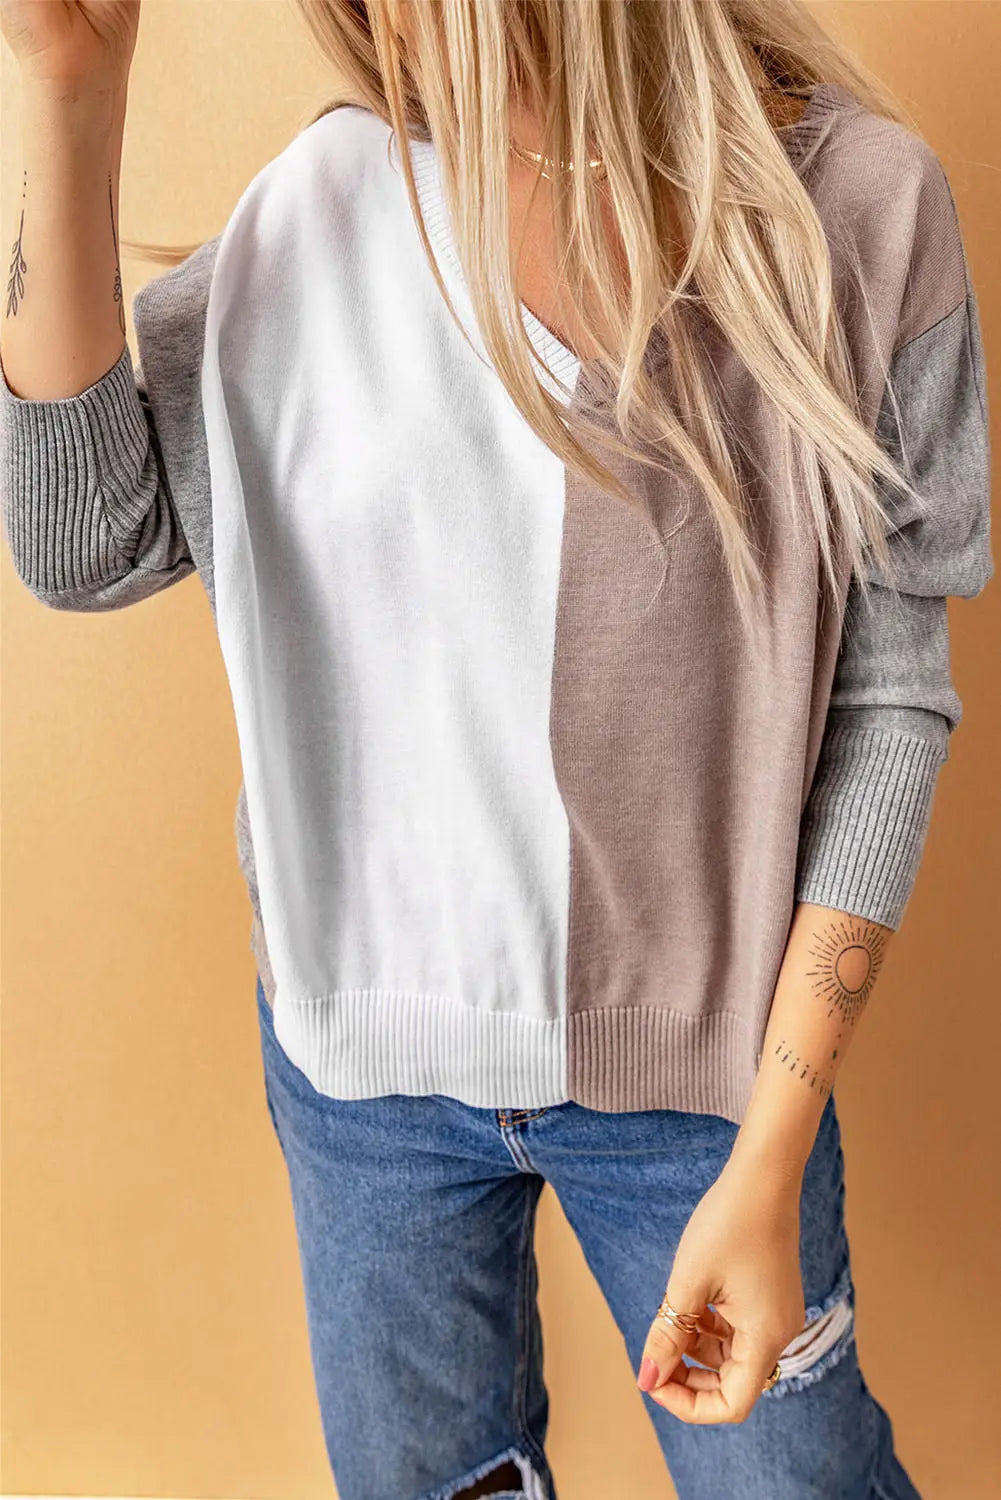 Apricot v-neck color block loose sweater - tops